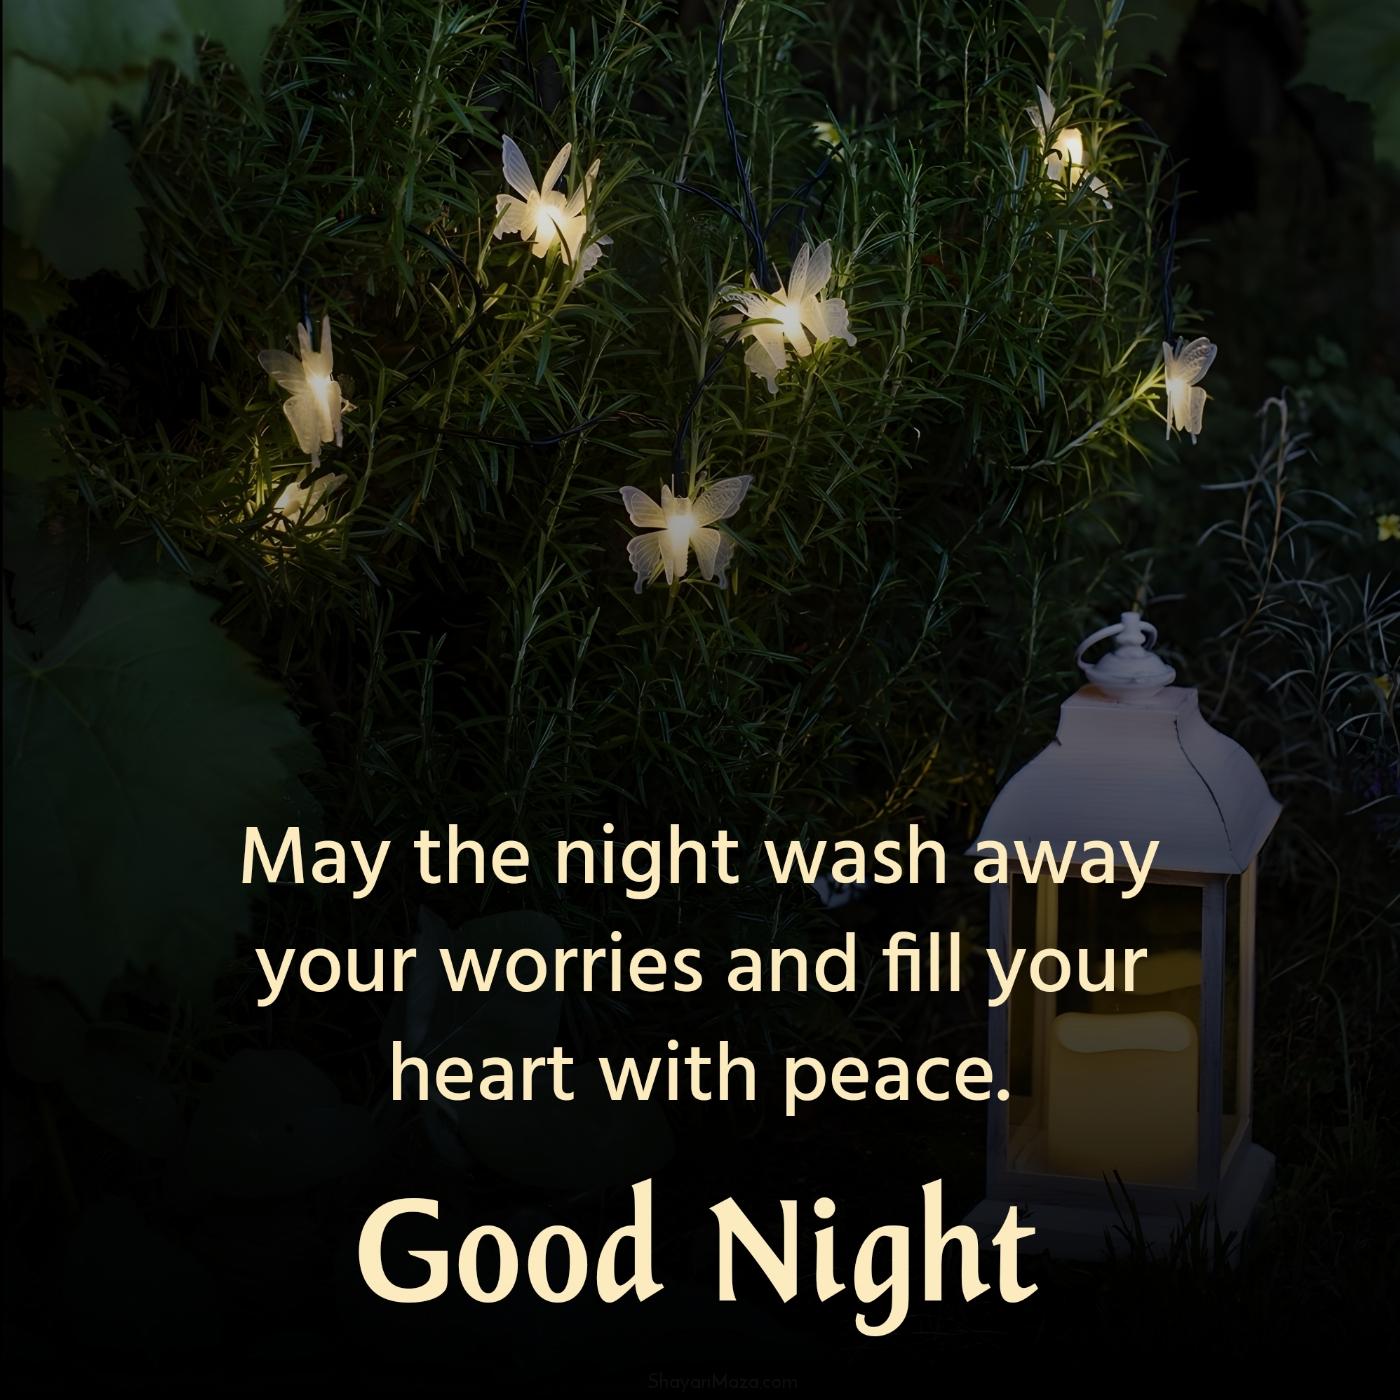 May the night wash away your worries and fill your heart